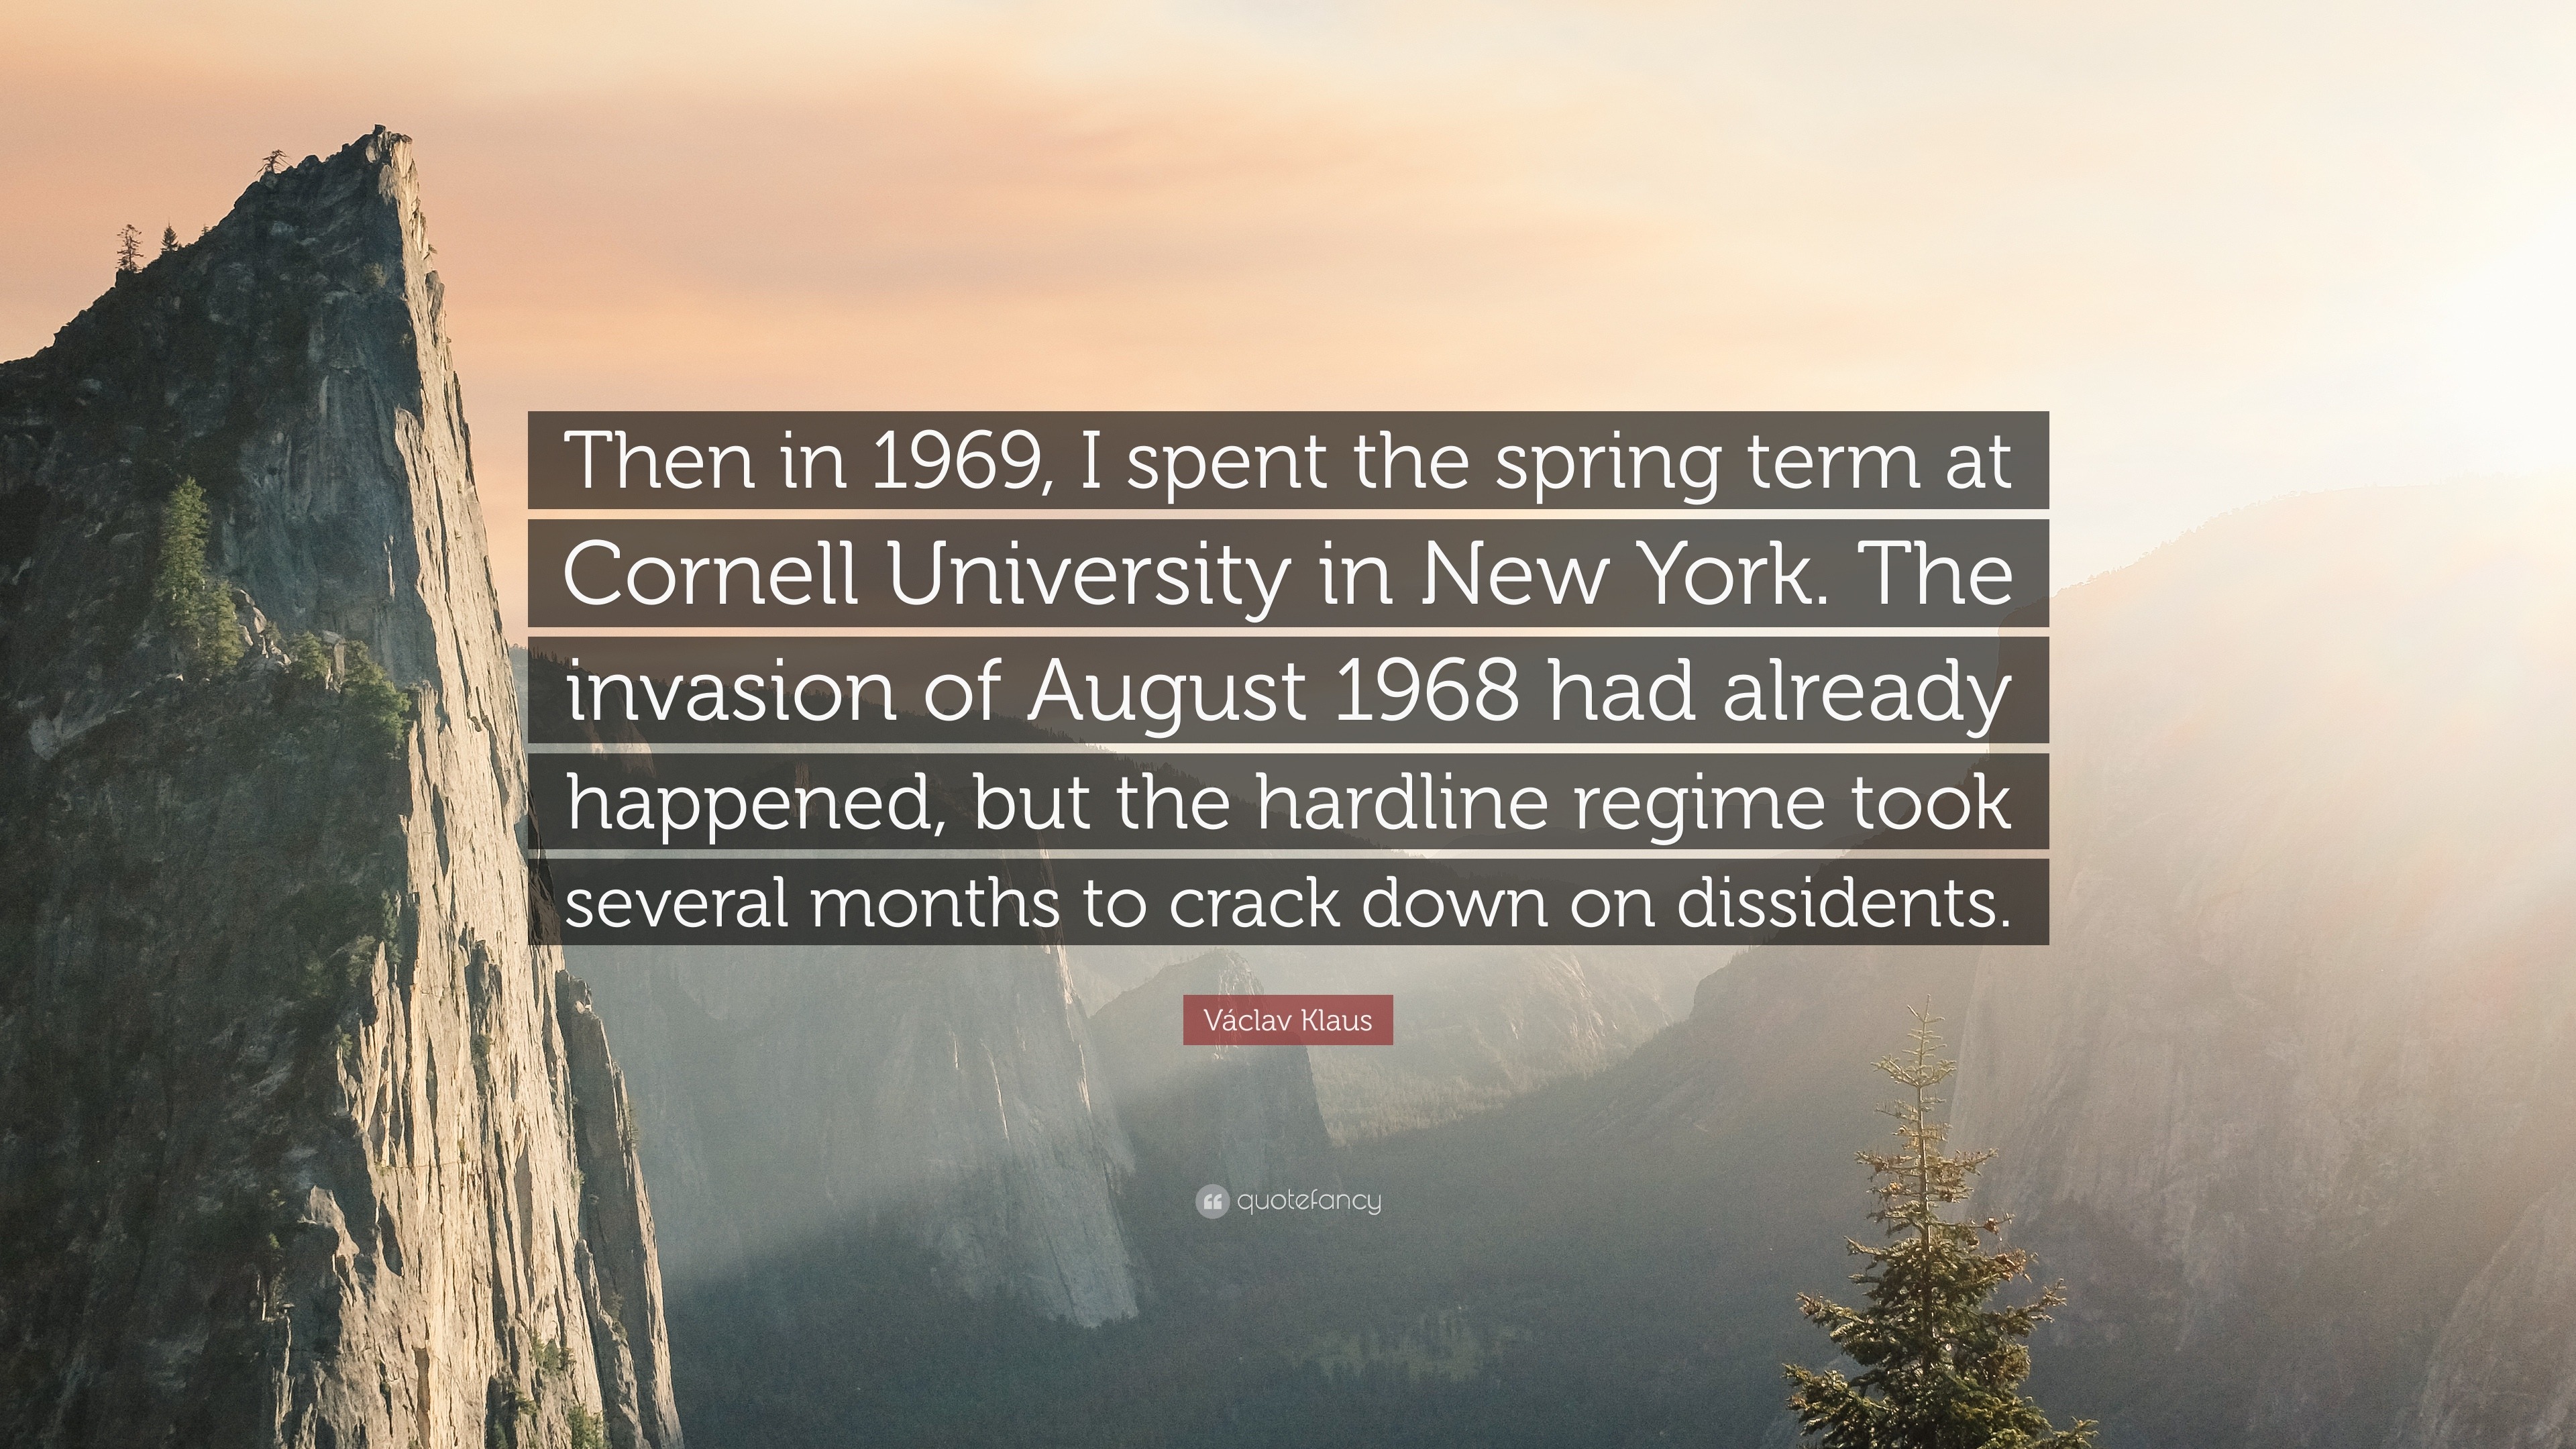 Václav Klaus Quote: "Then in 1969, I spent the spring term at Cornell University in New York ...